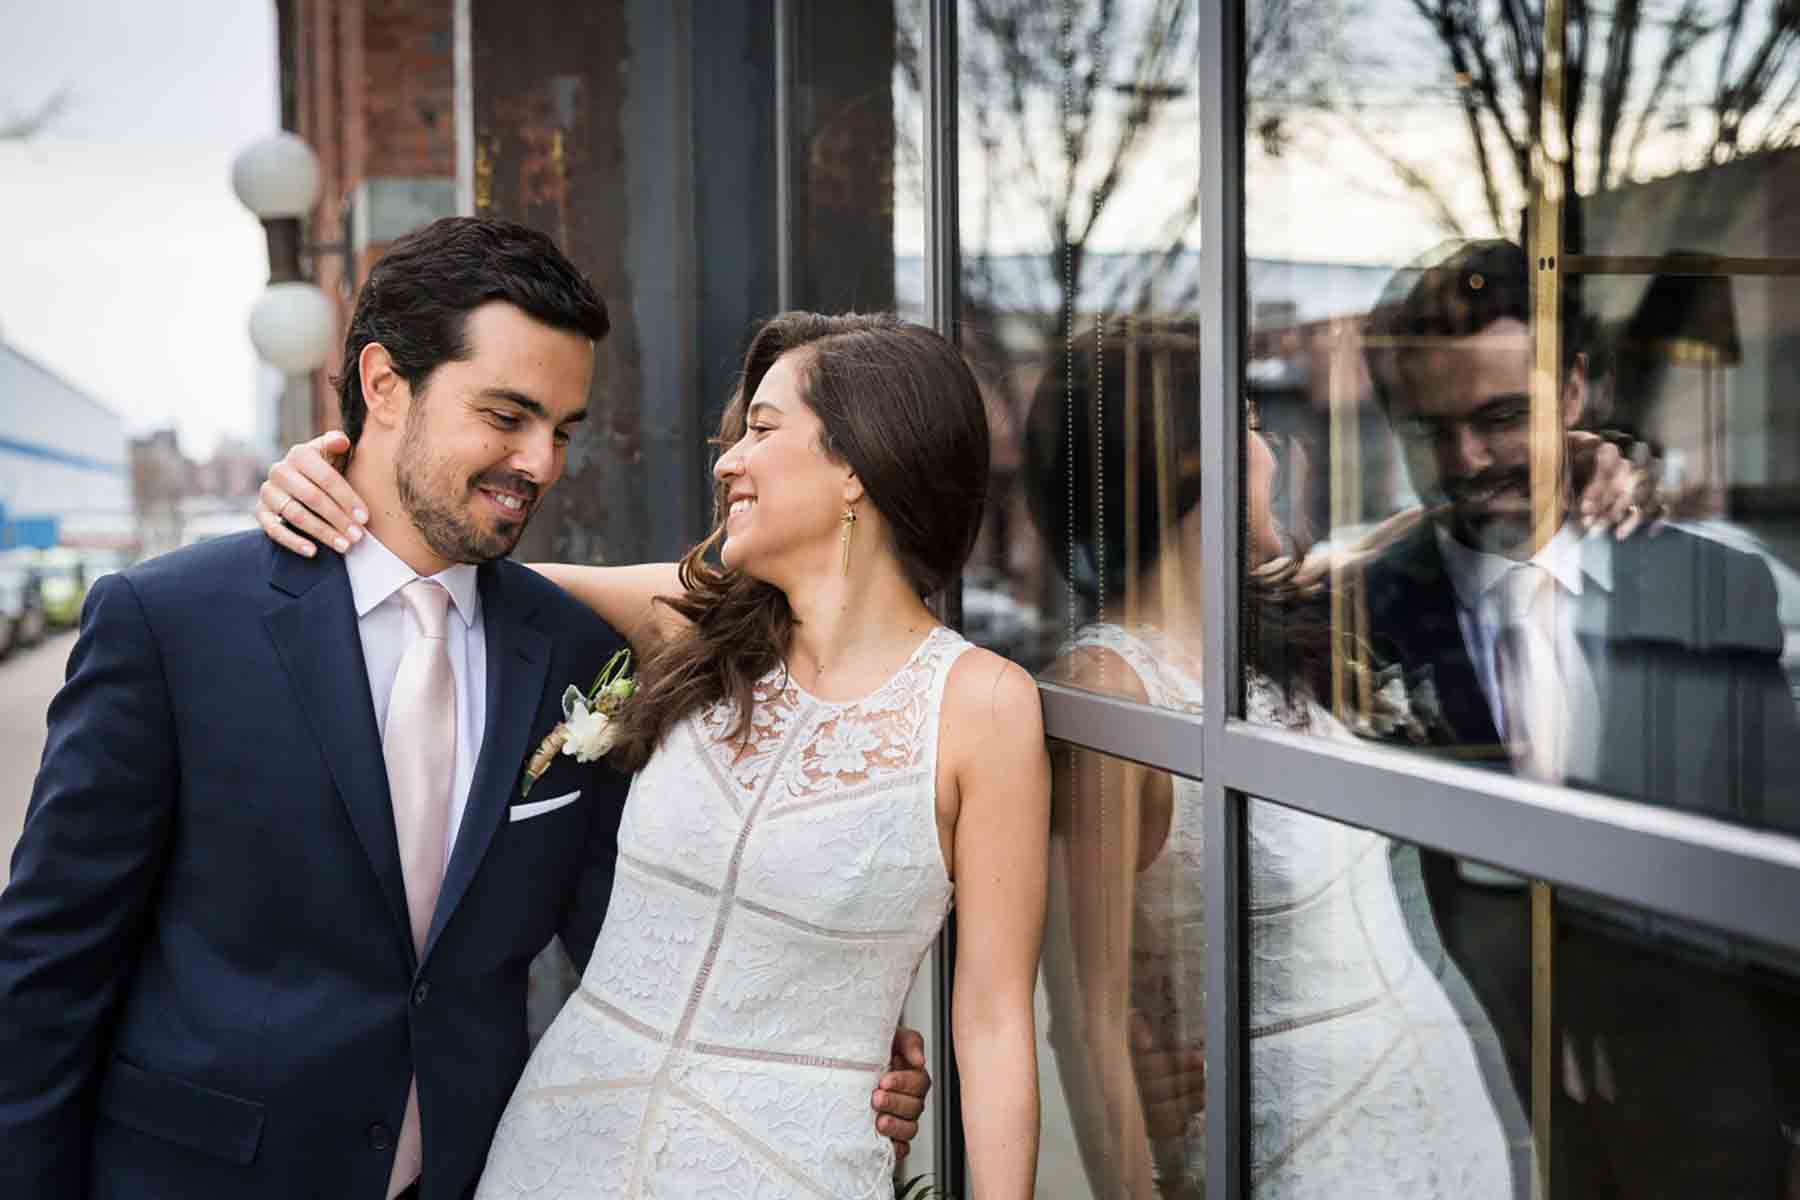 Bride and groom leaning against window for an article on how to save money on wedding photography